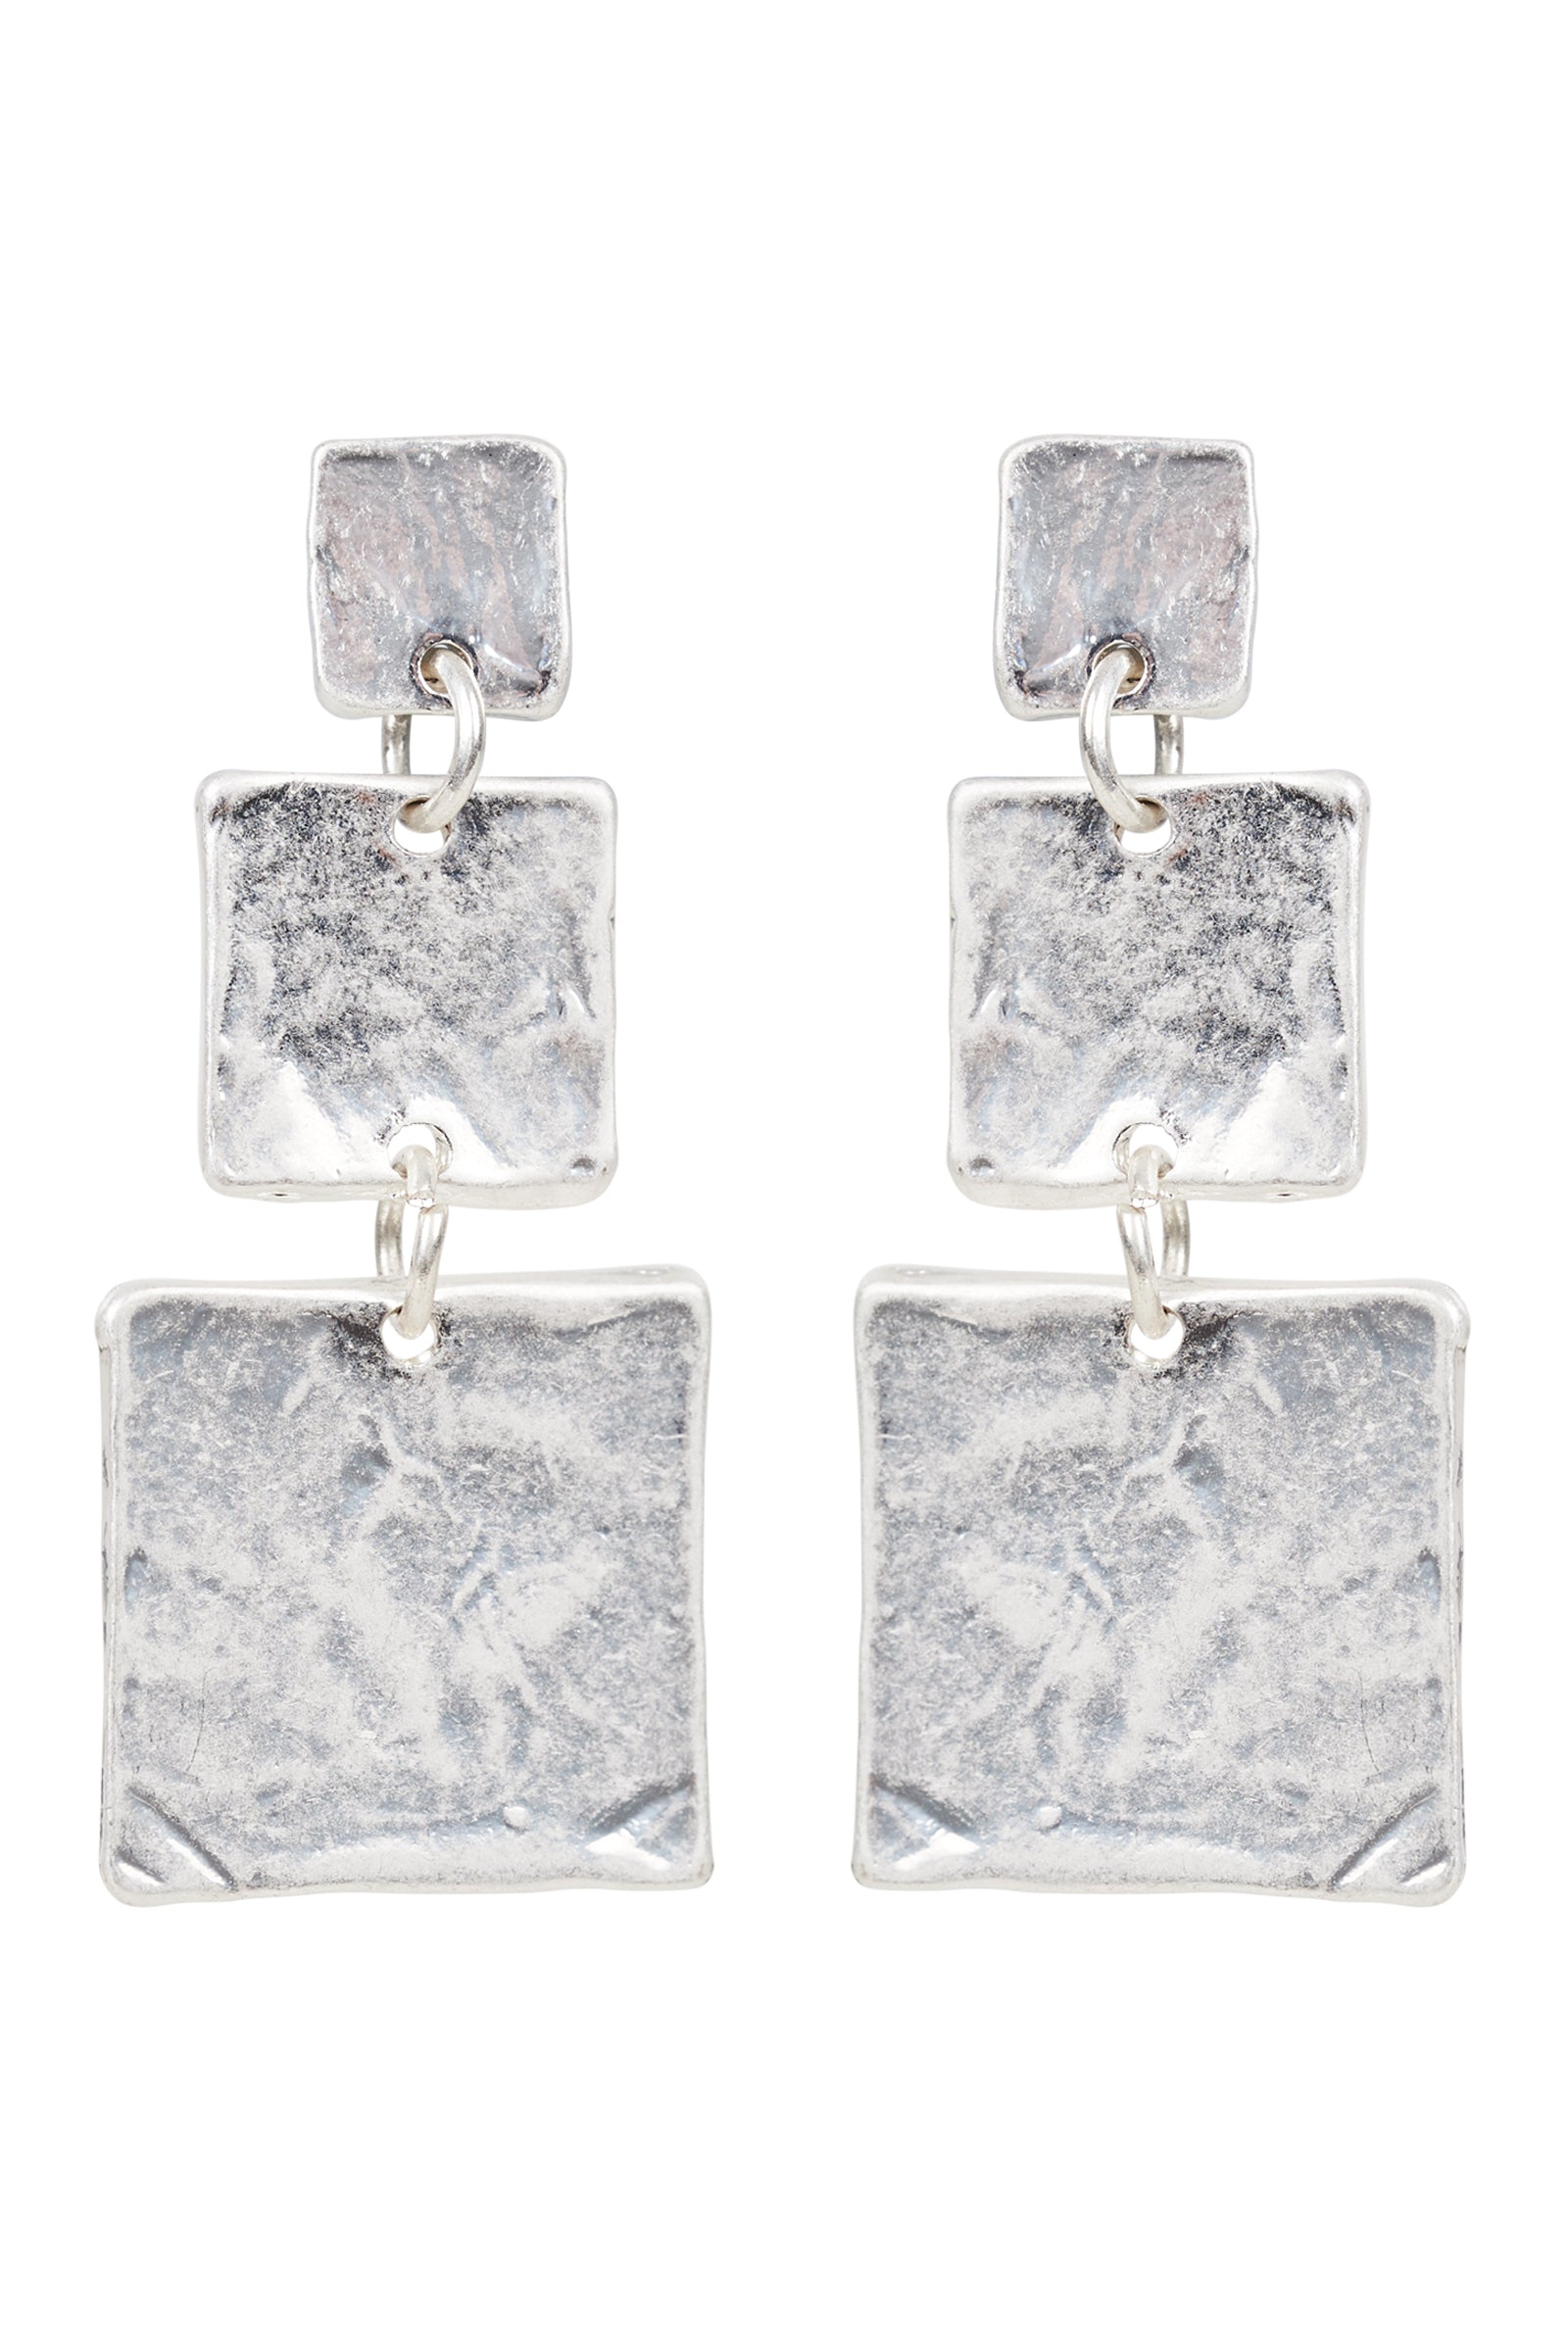 Paarl Square Drop Earring - Silver - eb&ive Earring